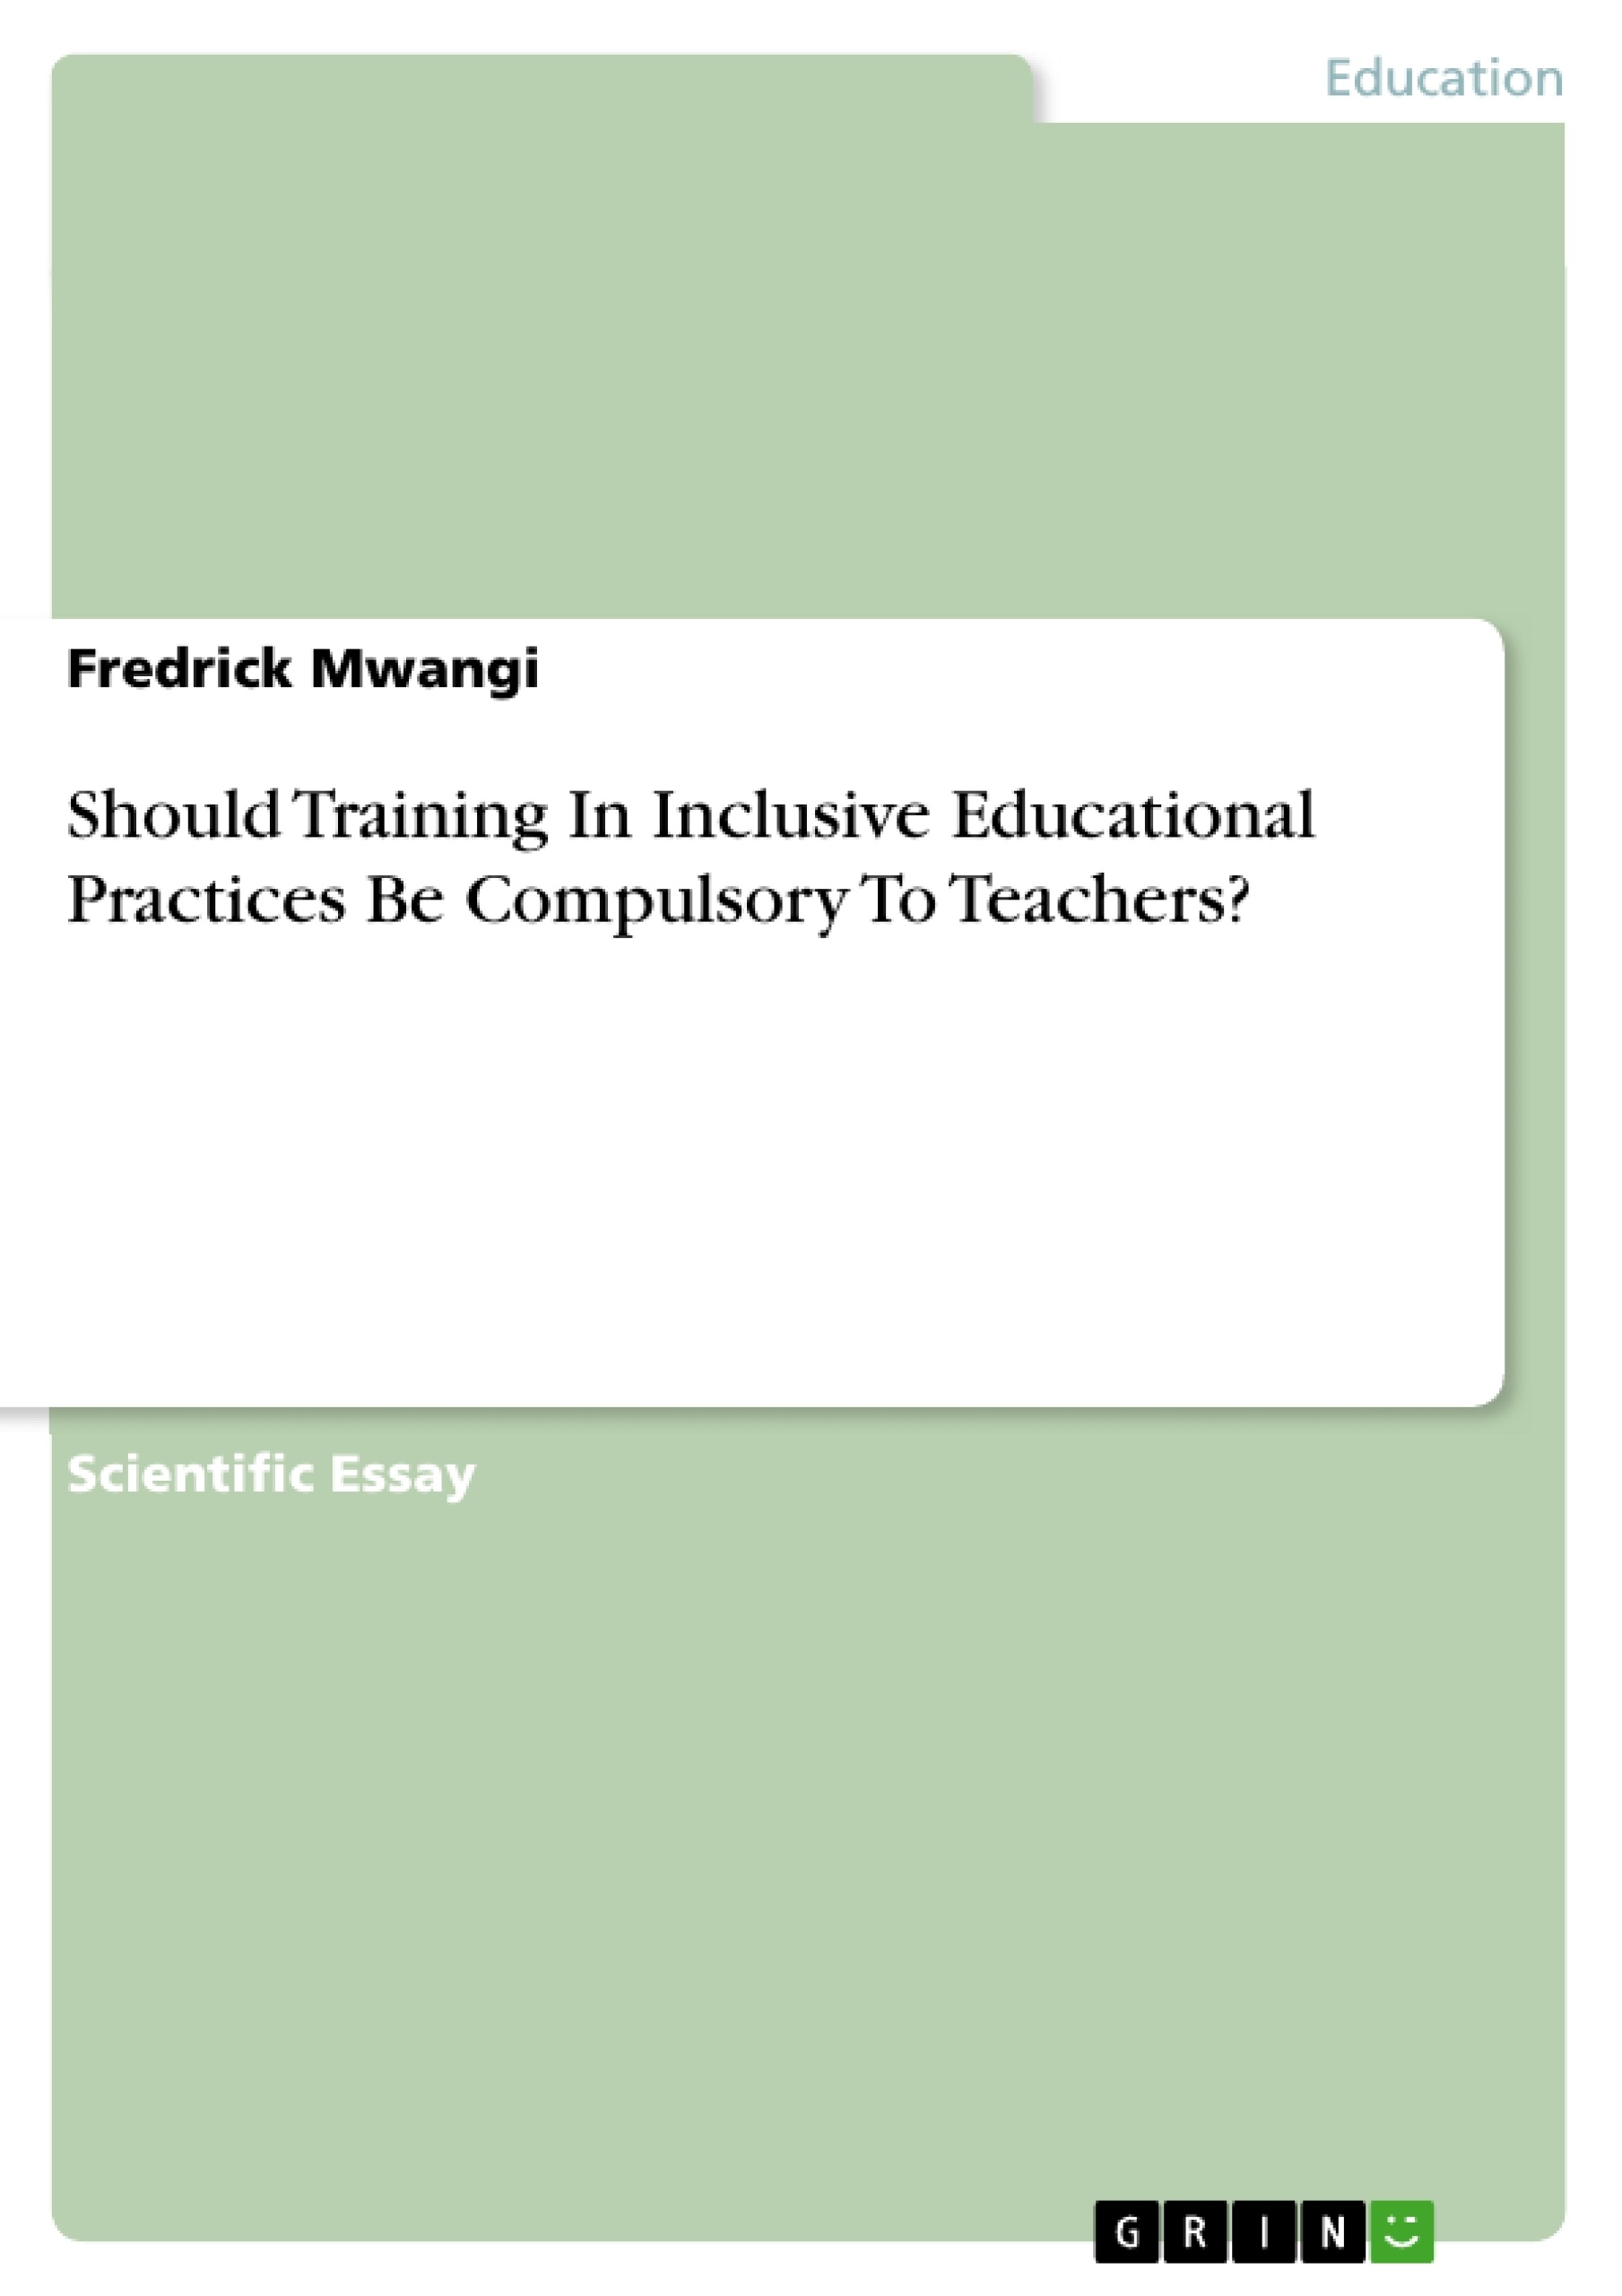 Titel: Should Training In Inclusive Educational Practices Be Compulsory To Teachers?